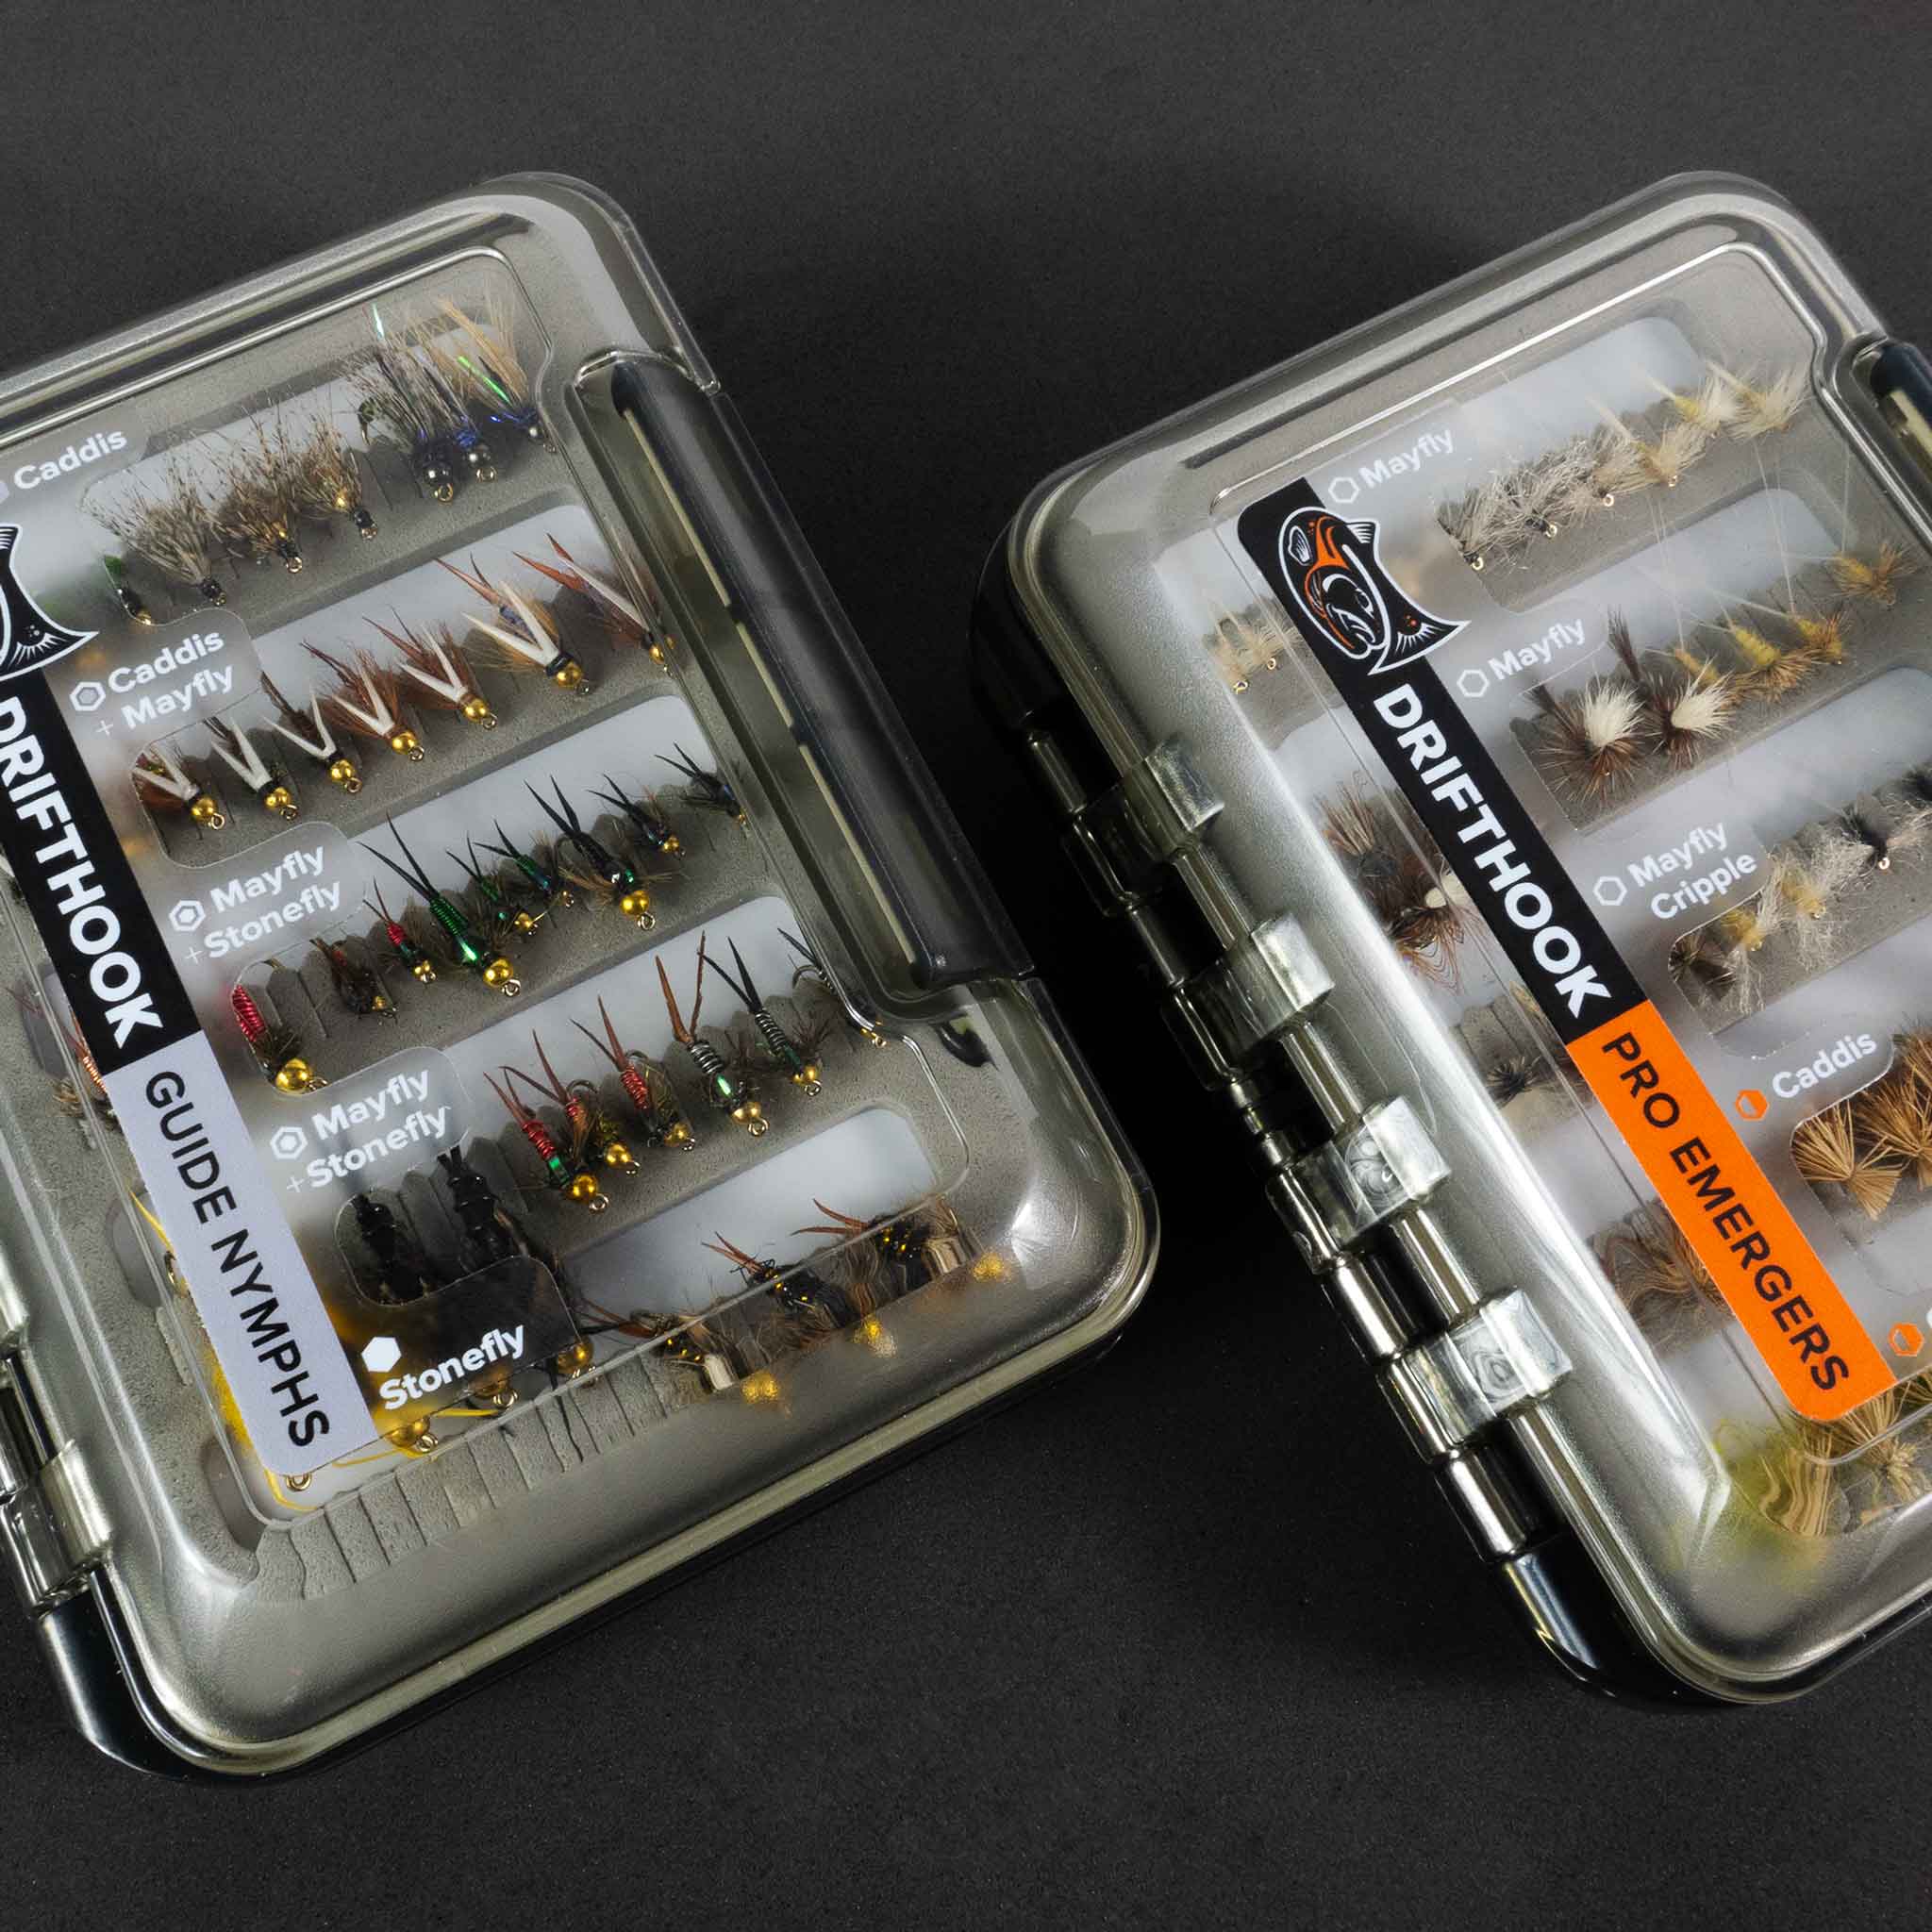  koity Fly Fishing Flies Kit, 36pcs Hand Tied Fly Fishing Lures  with Waterproof Fly Box Fly Fishing Gear Assortment Kit Dry Wet Flies  Nymphs Popper Streamers Hopper Caddis Gnat Stonefly